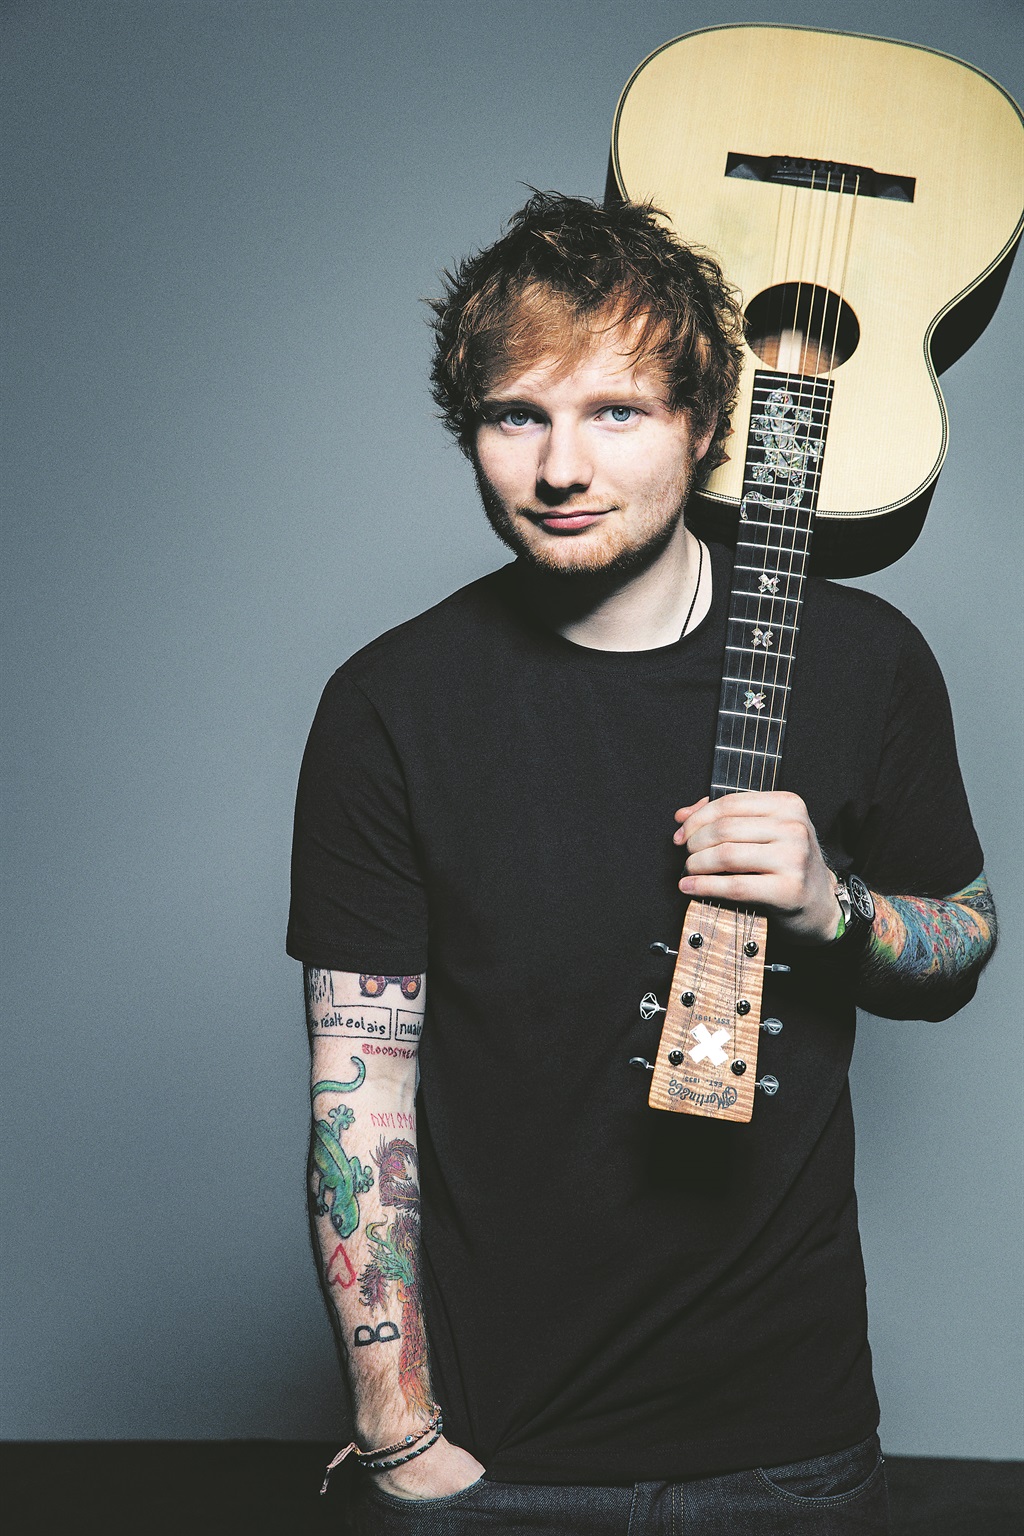 Ed Sheeran will perform in Joburg and Cape Town.